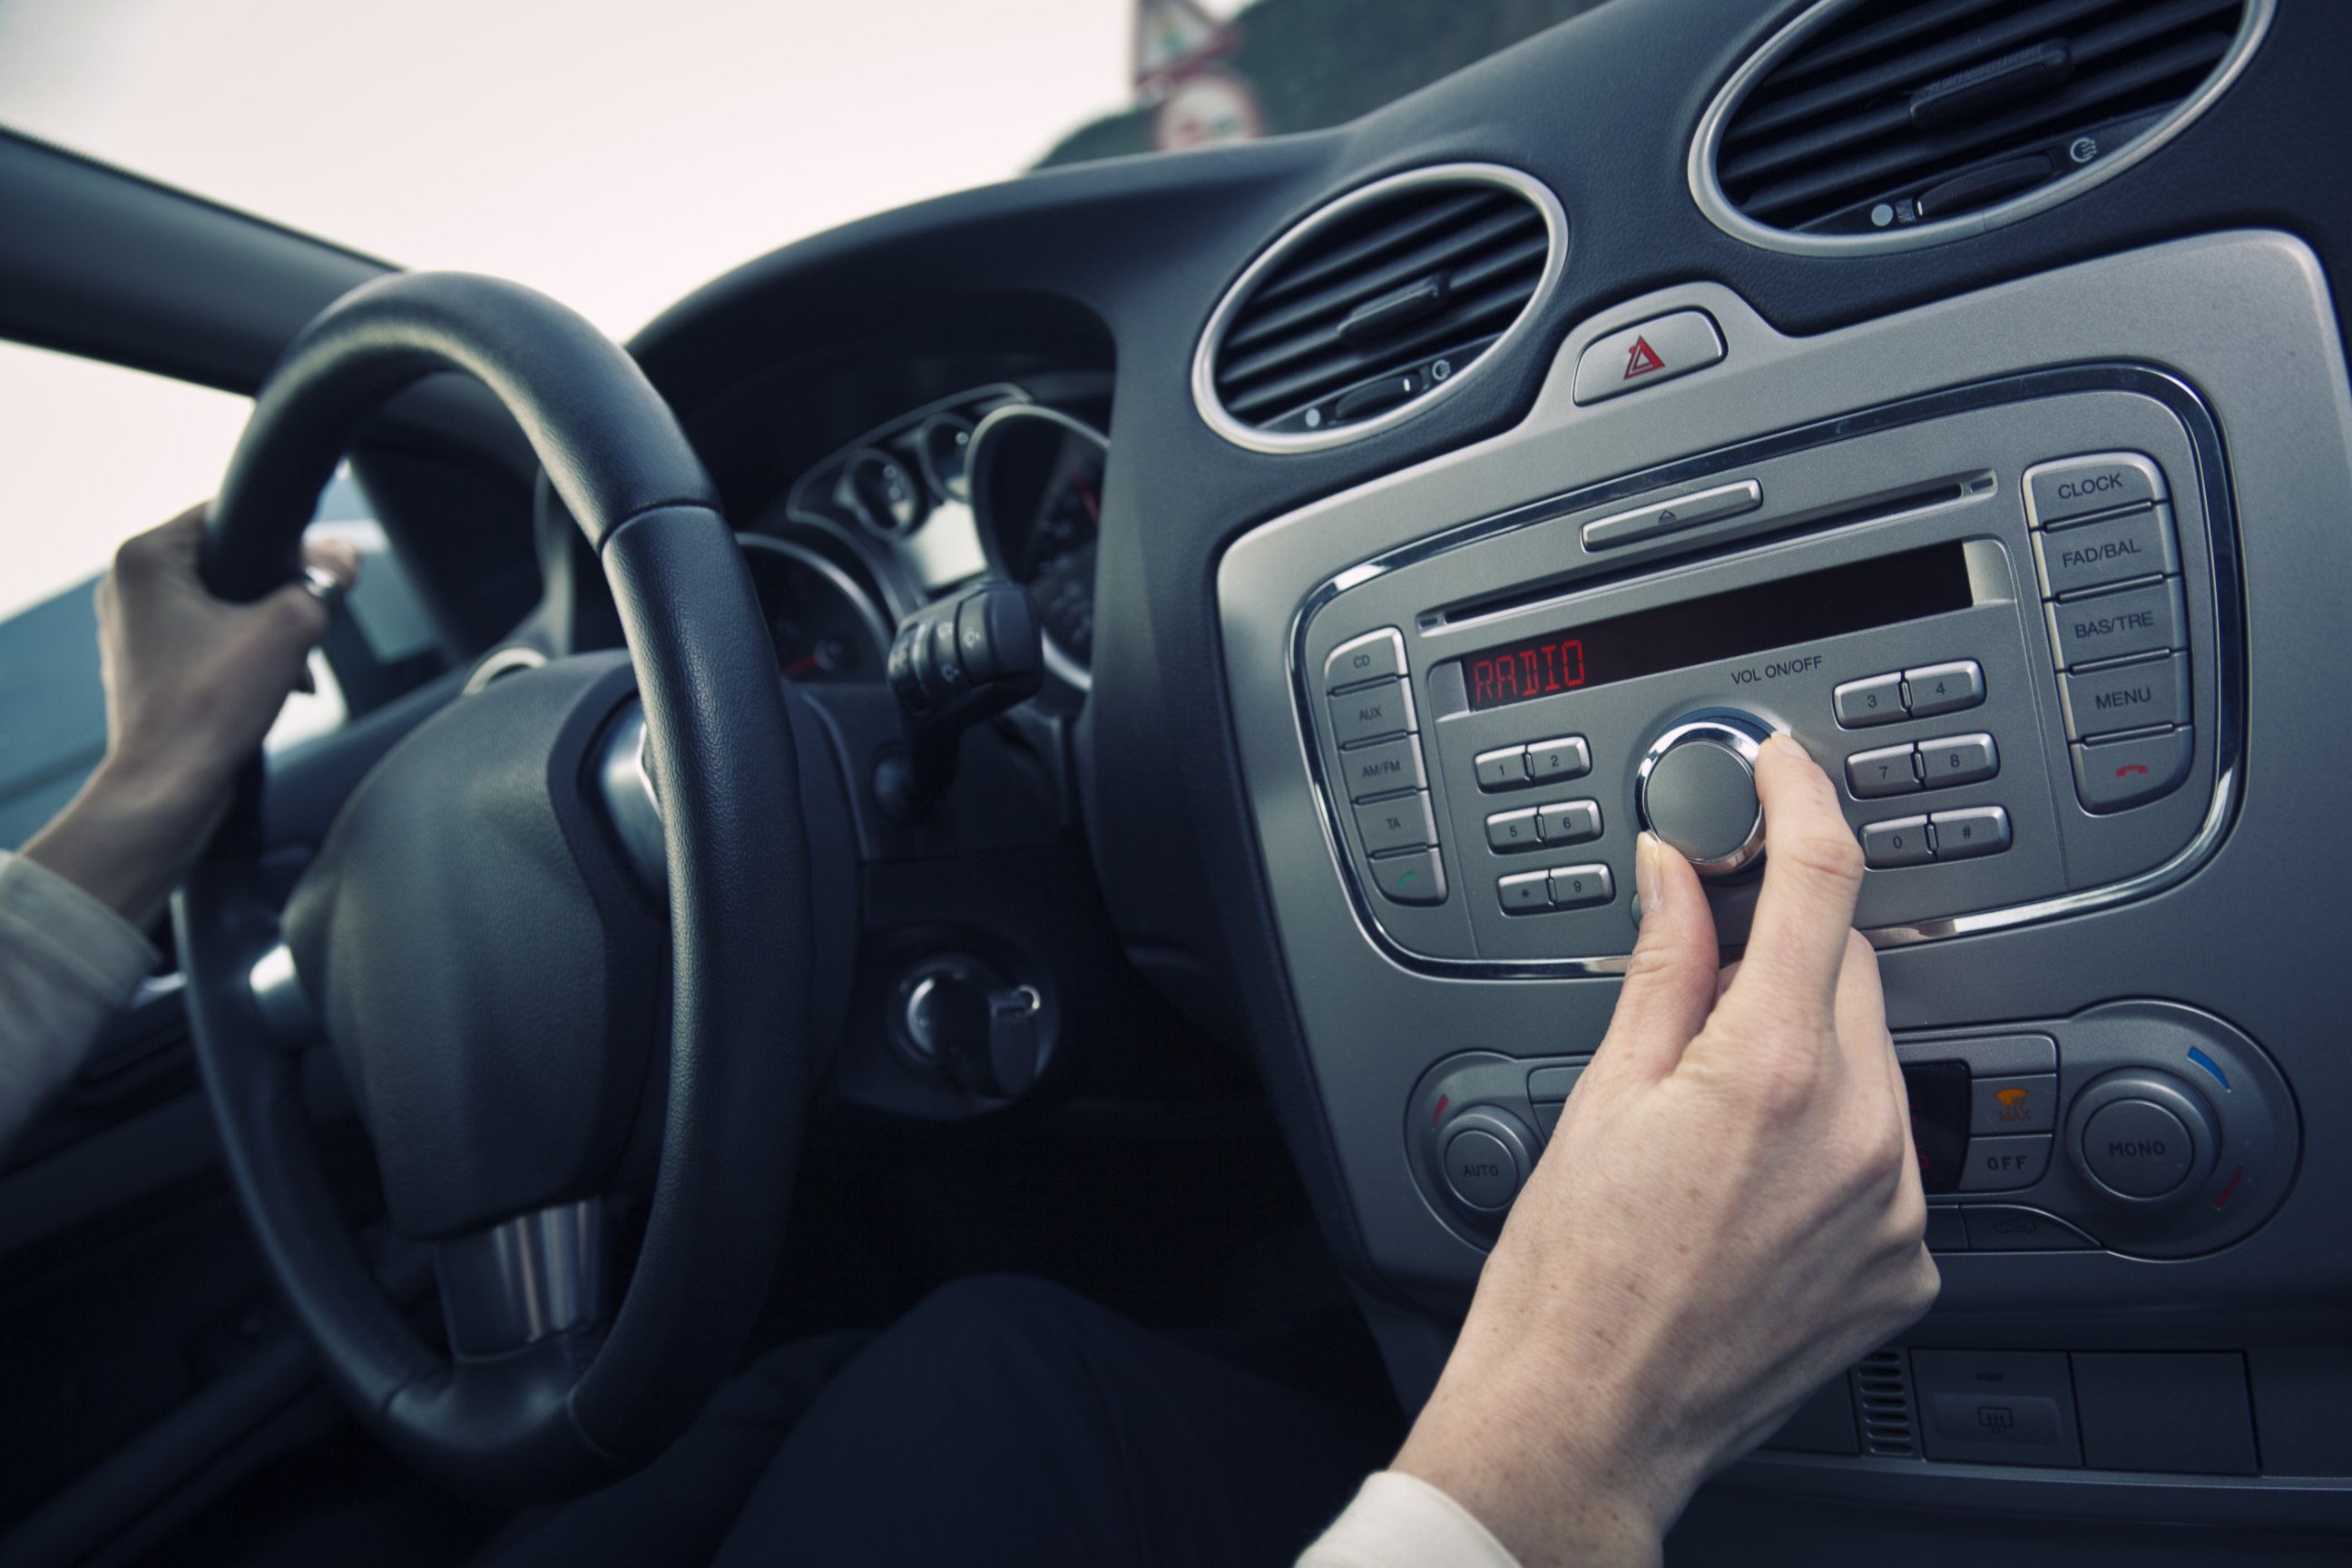 PHOTO: A man adjust the volume of a car stereo in this stock image.